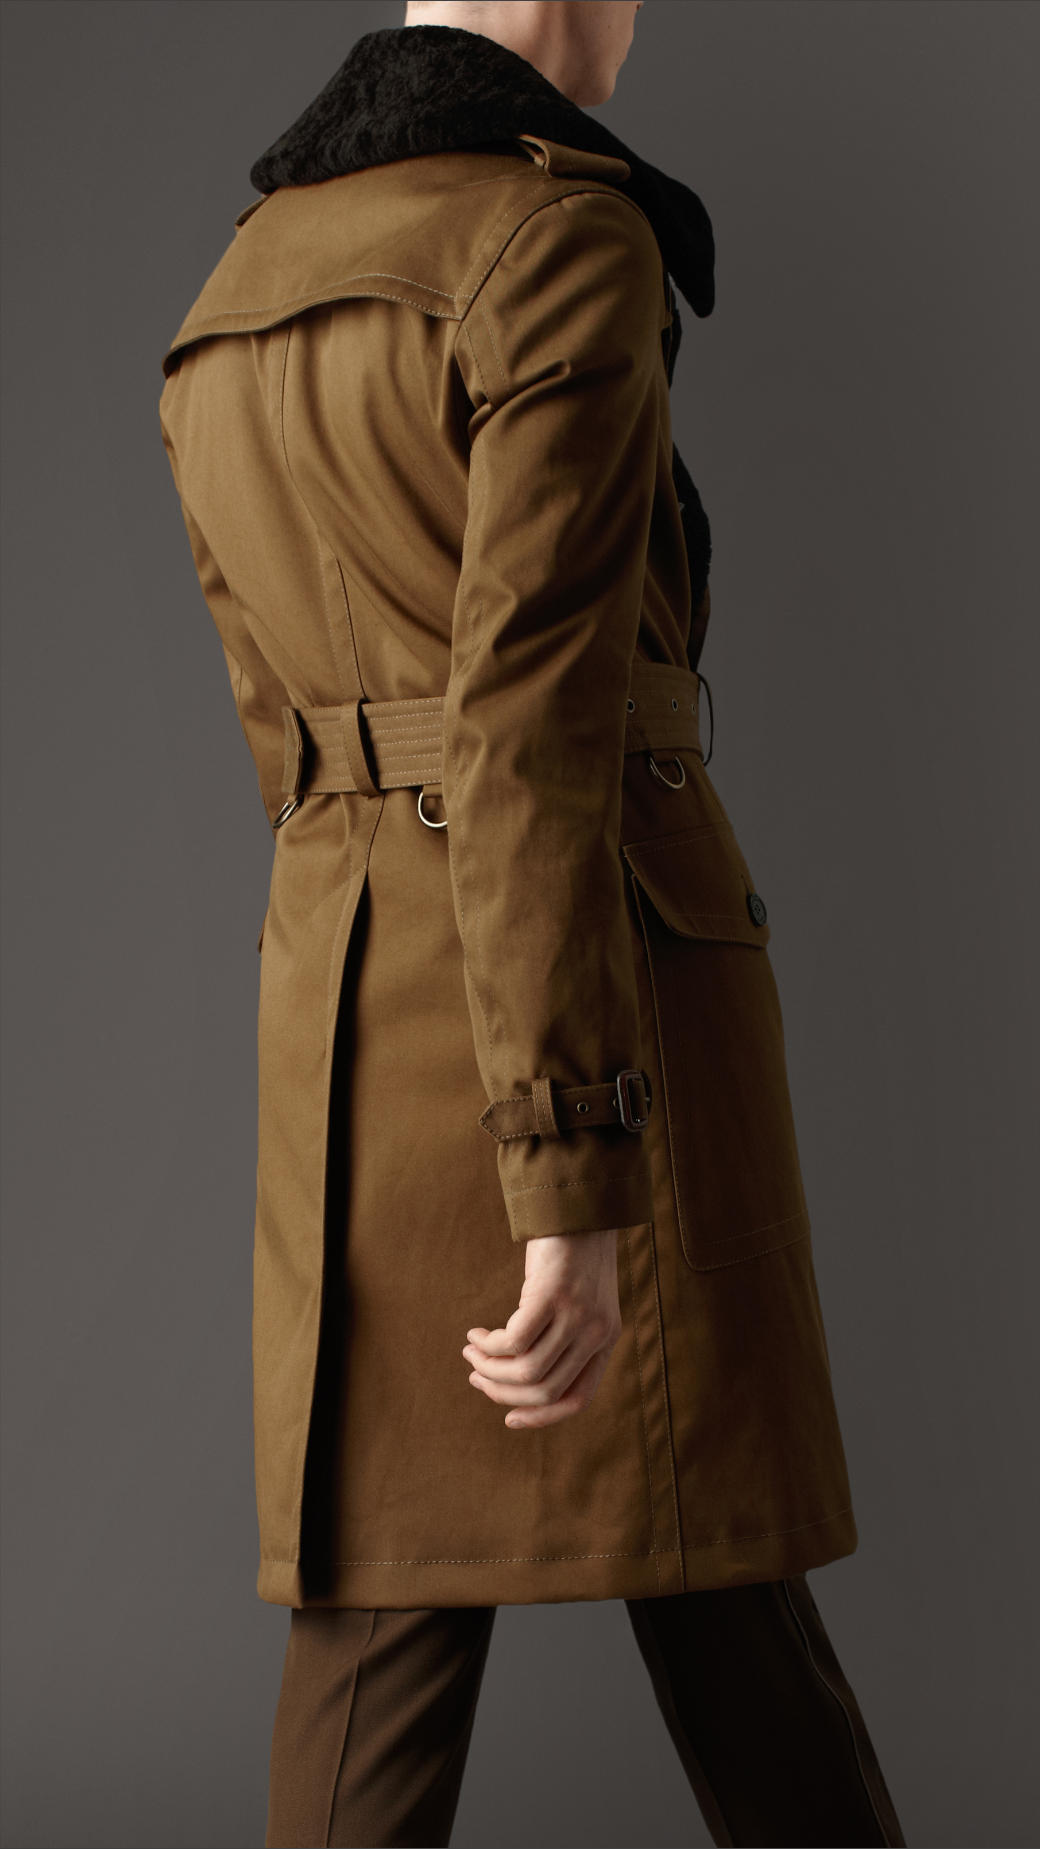 Burberry Shearling Collar Trench Coat in Brown for Men - Lyst